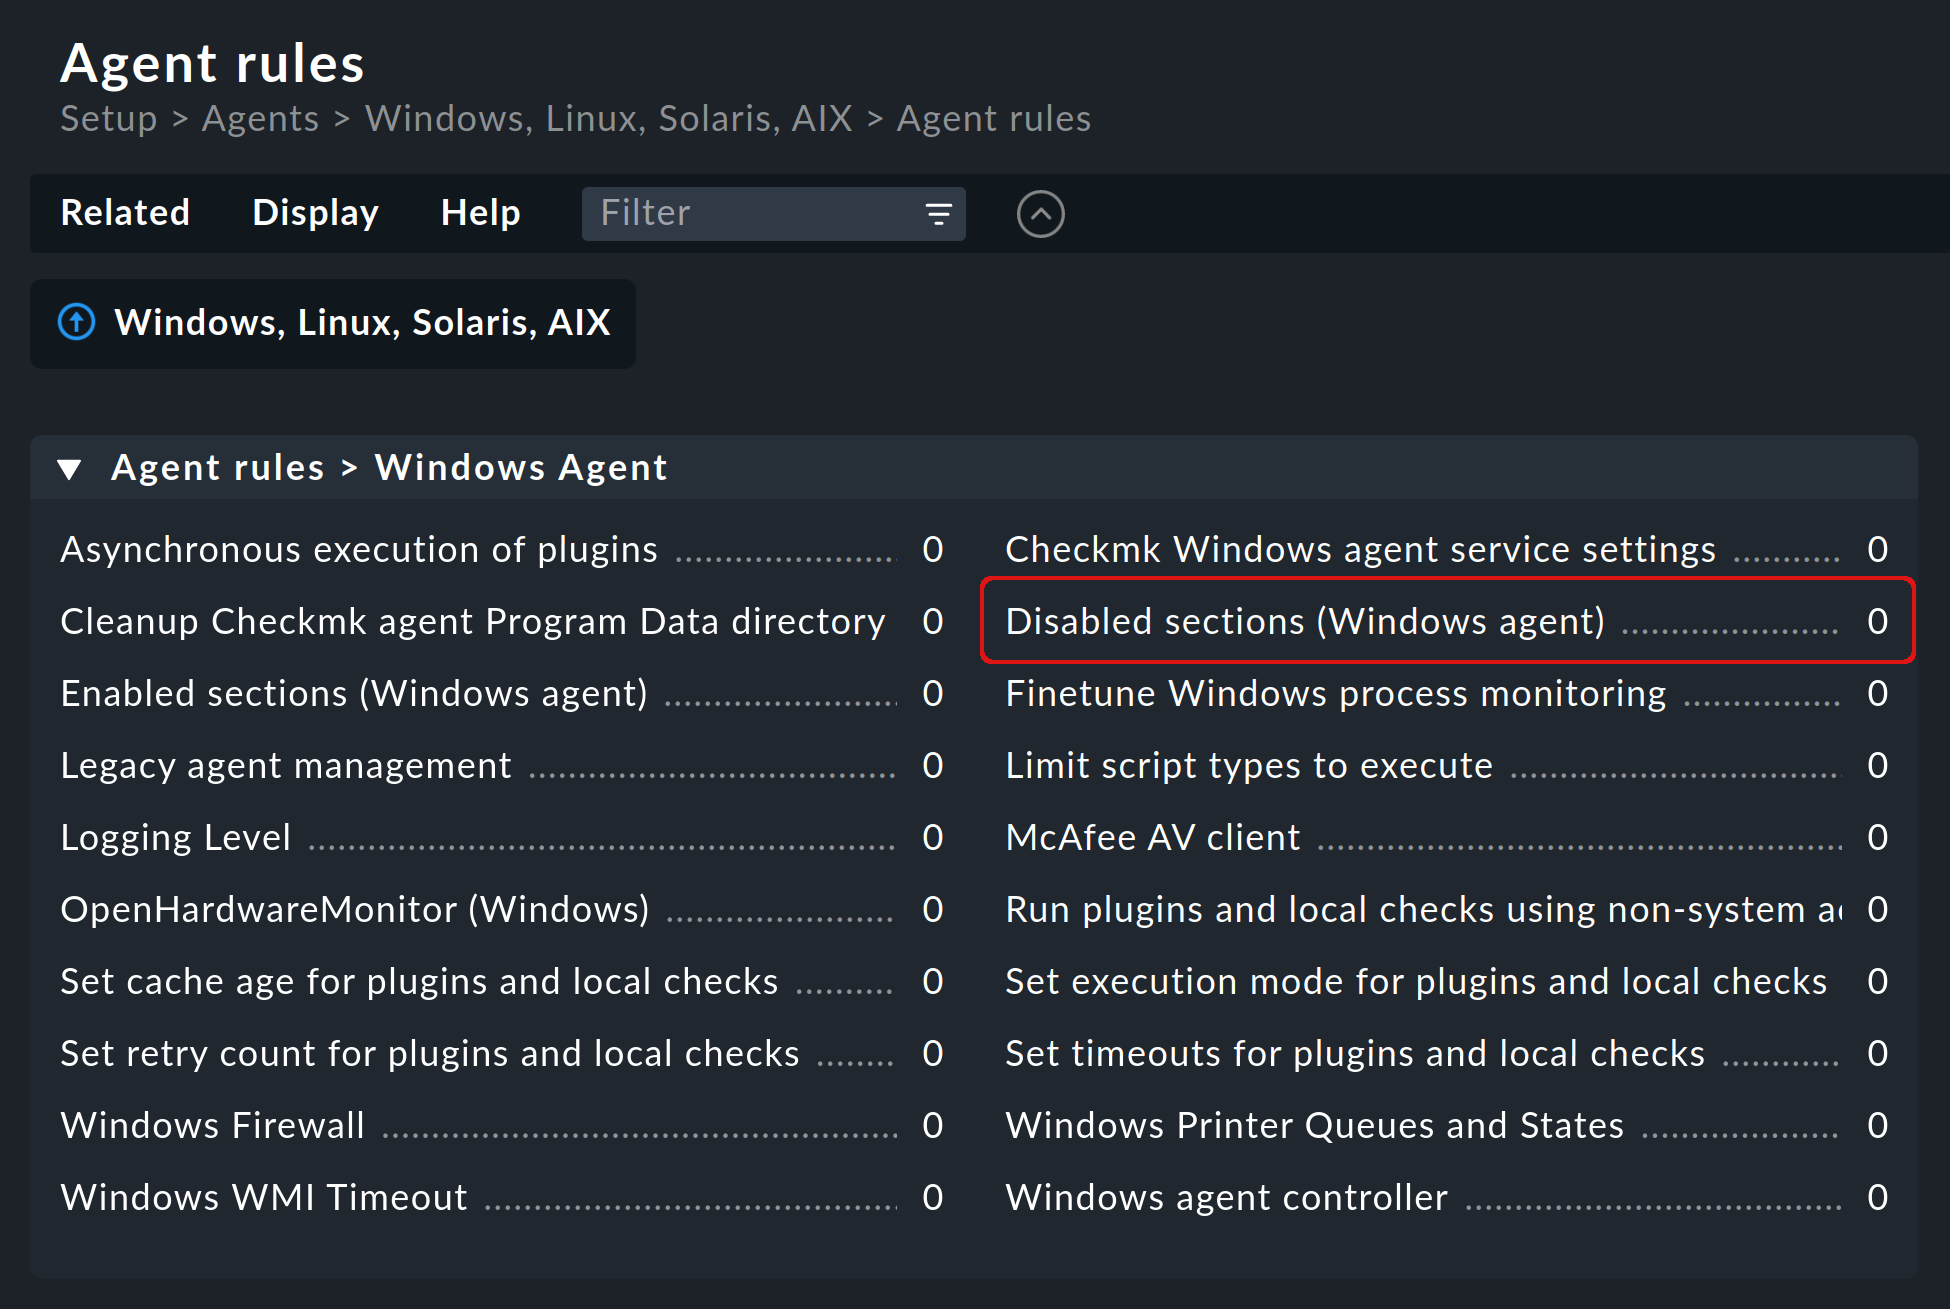 List of agent rules for the windows agent.